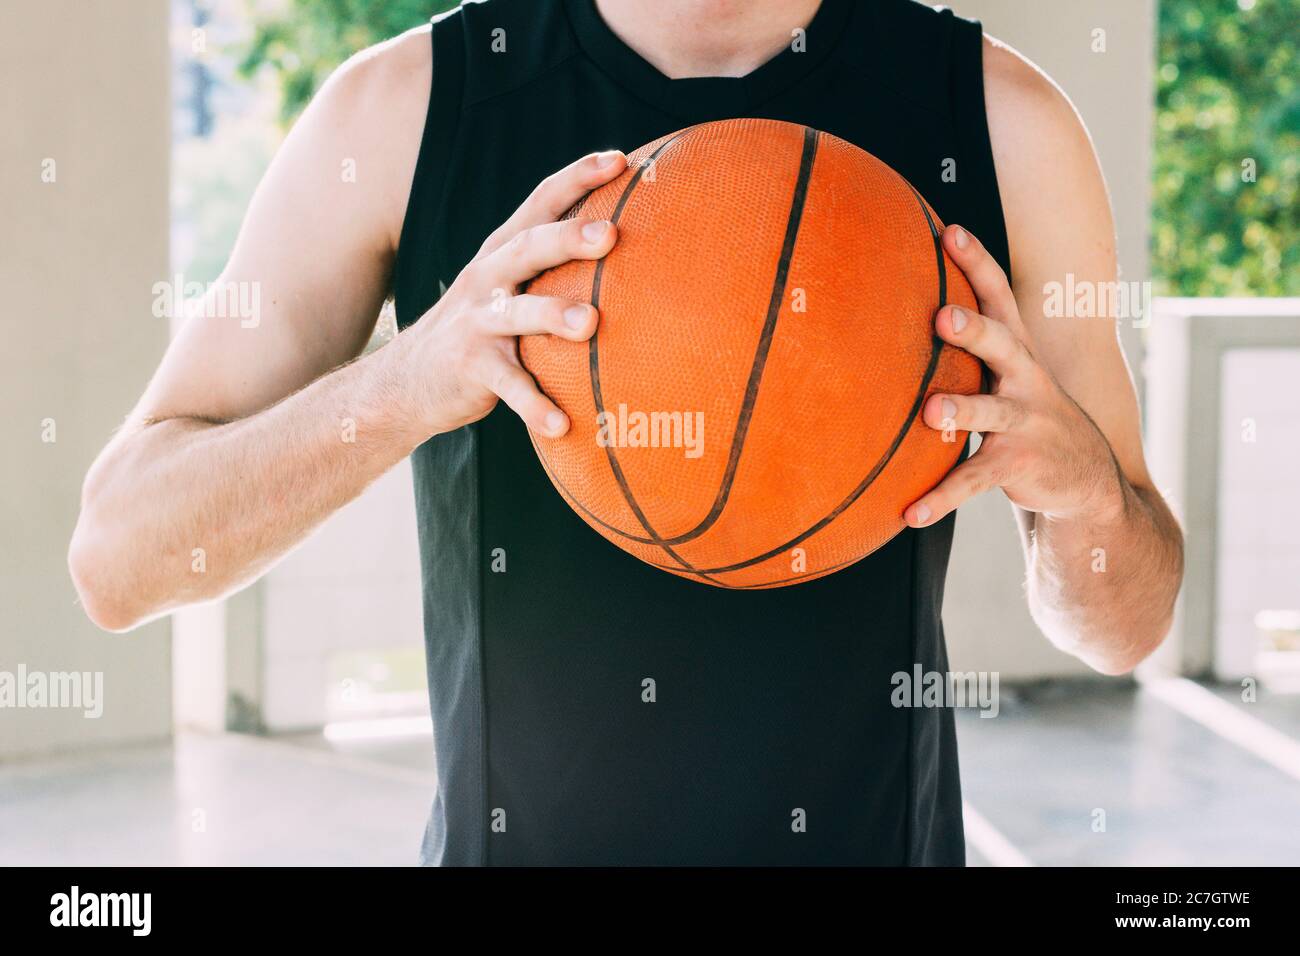 Basketball player with the ball Stock Photo